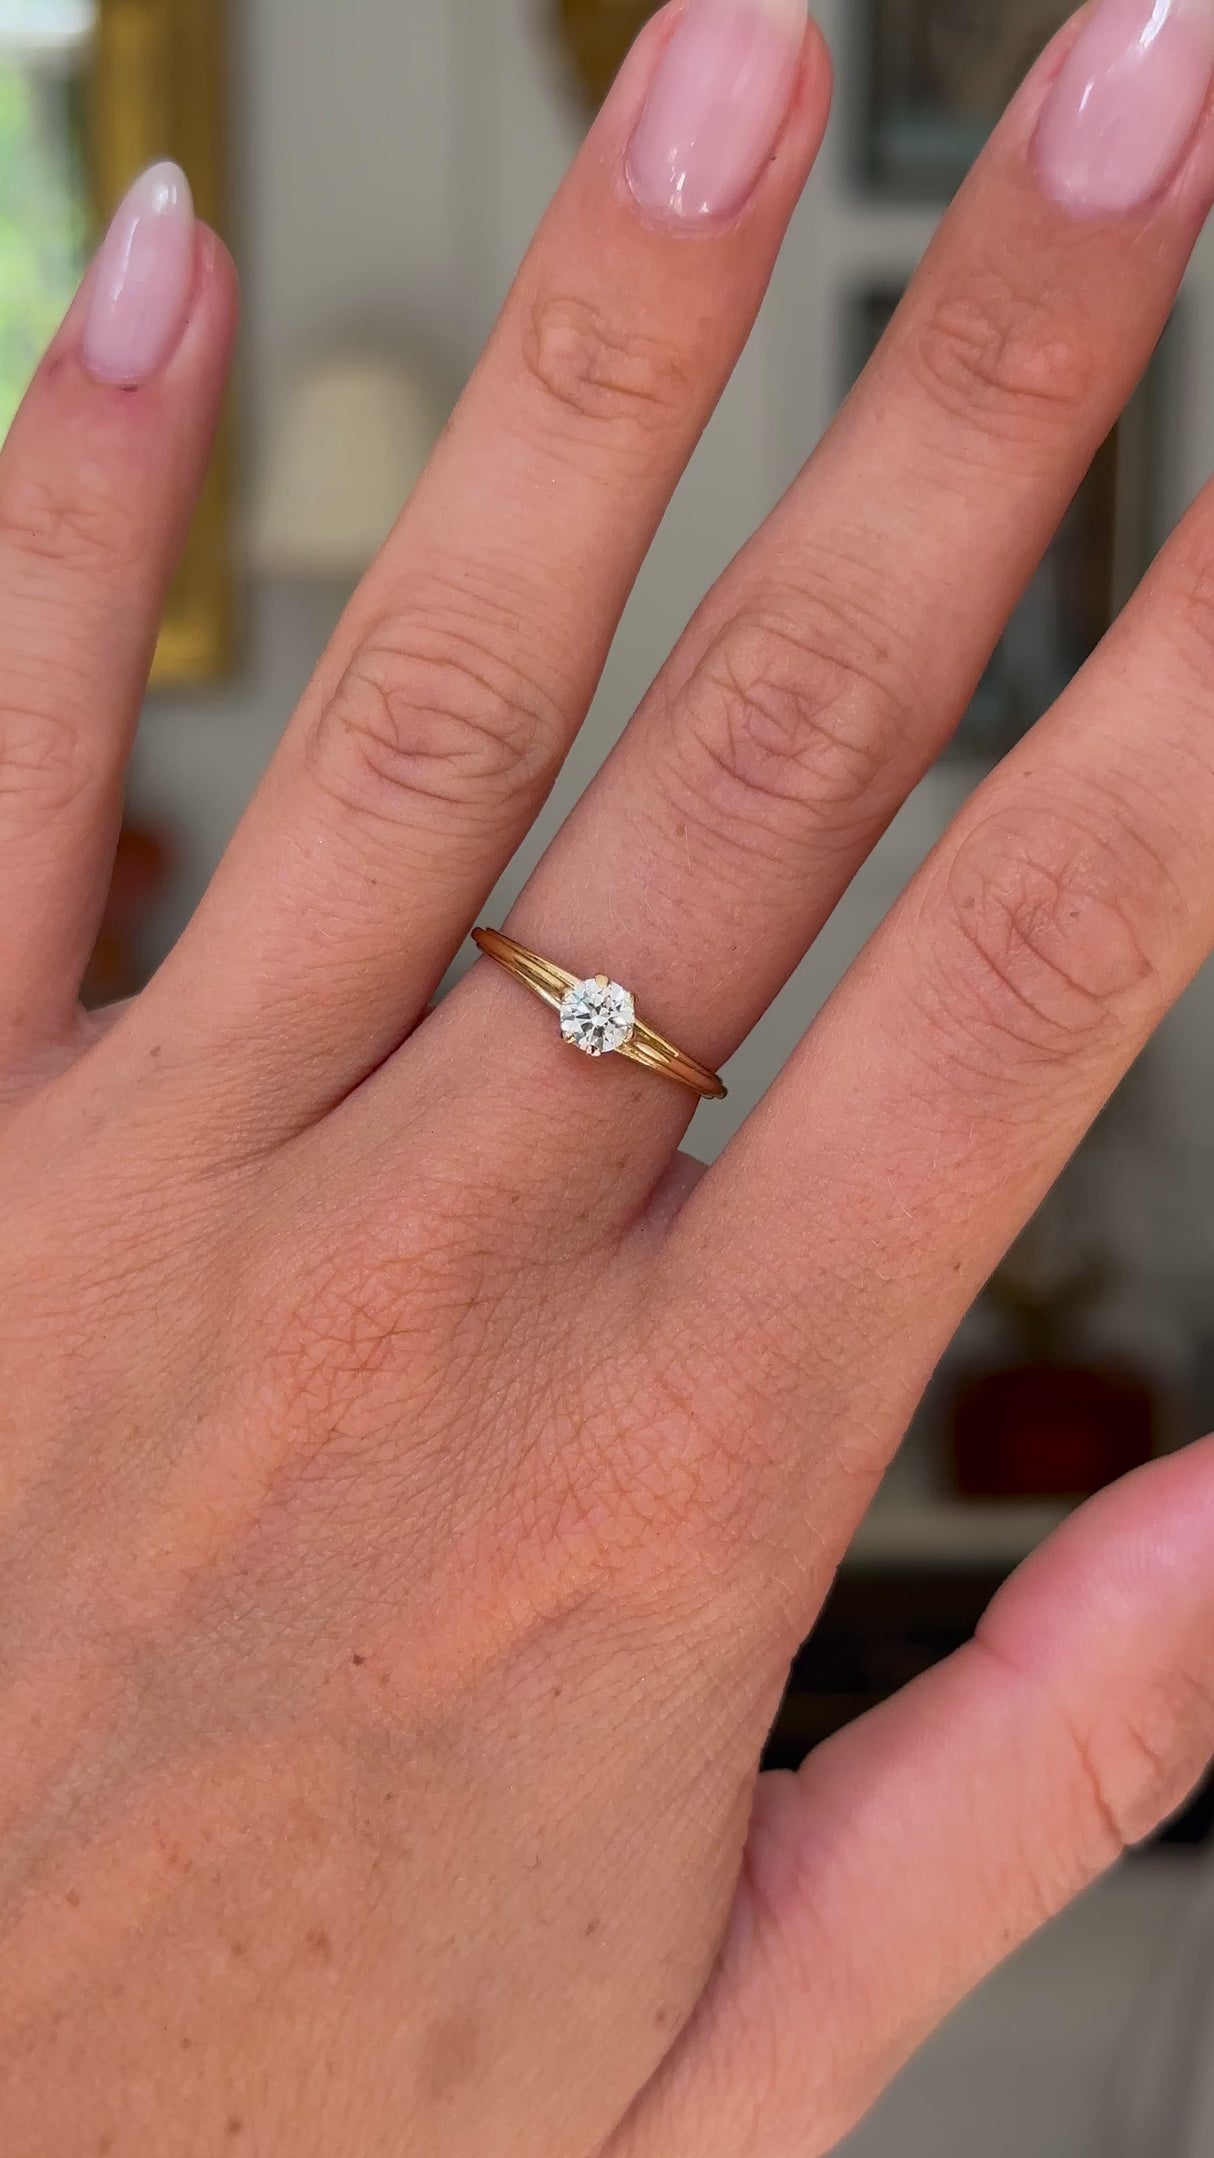 Vintage solitaire diamond engagement ring worn on hand and moved around to give perspective.